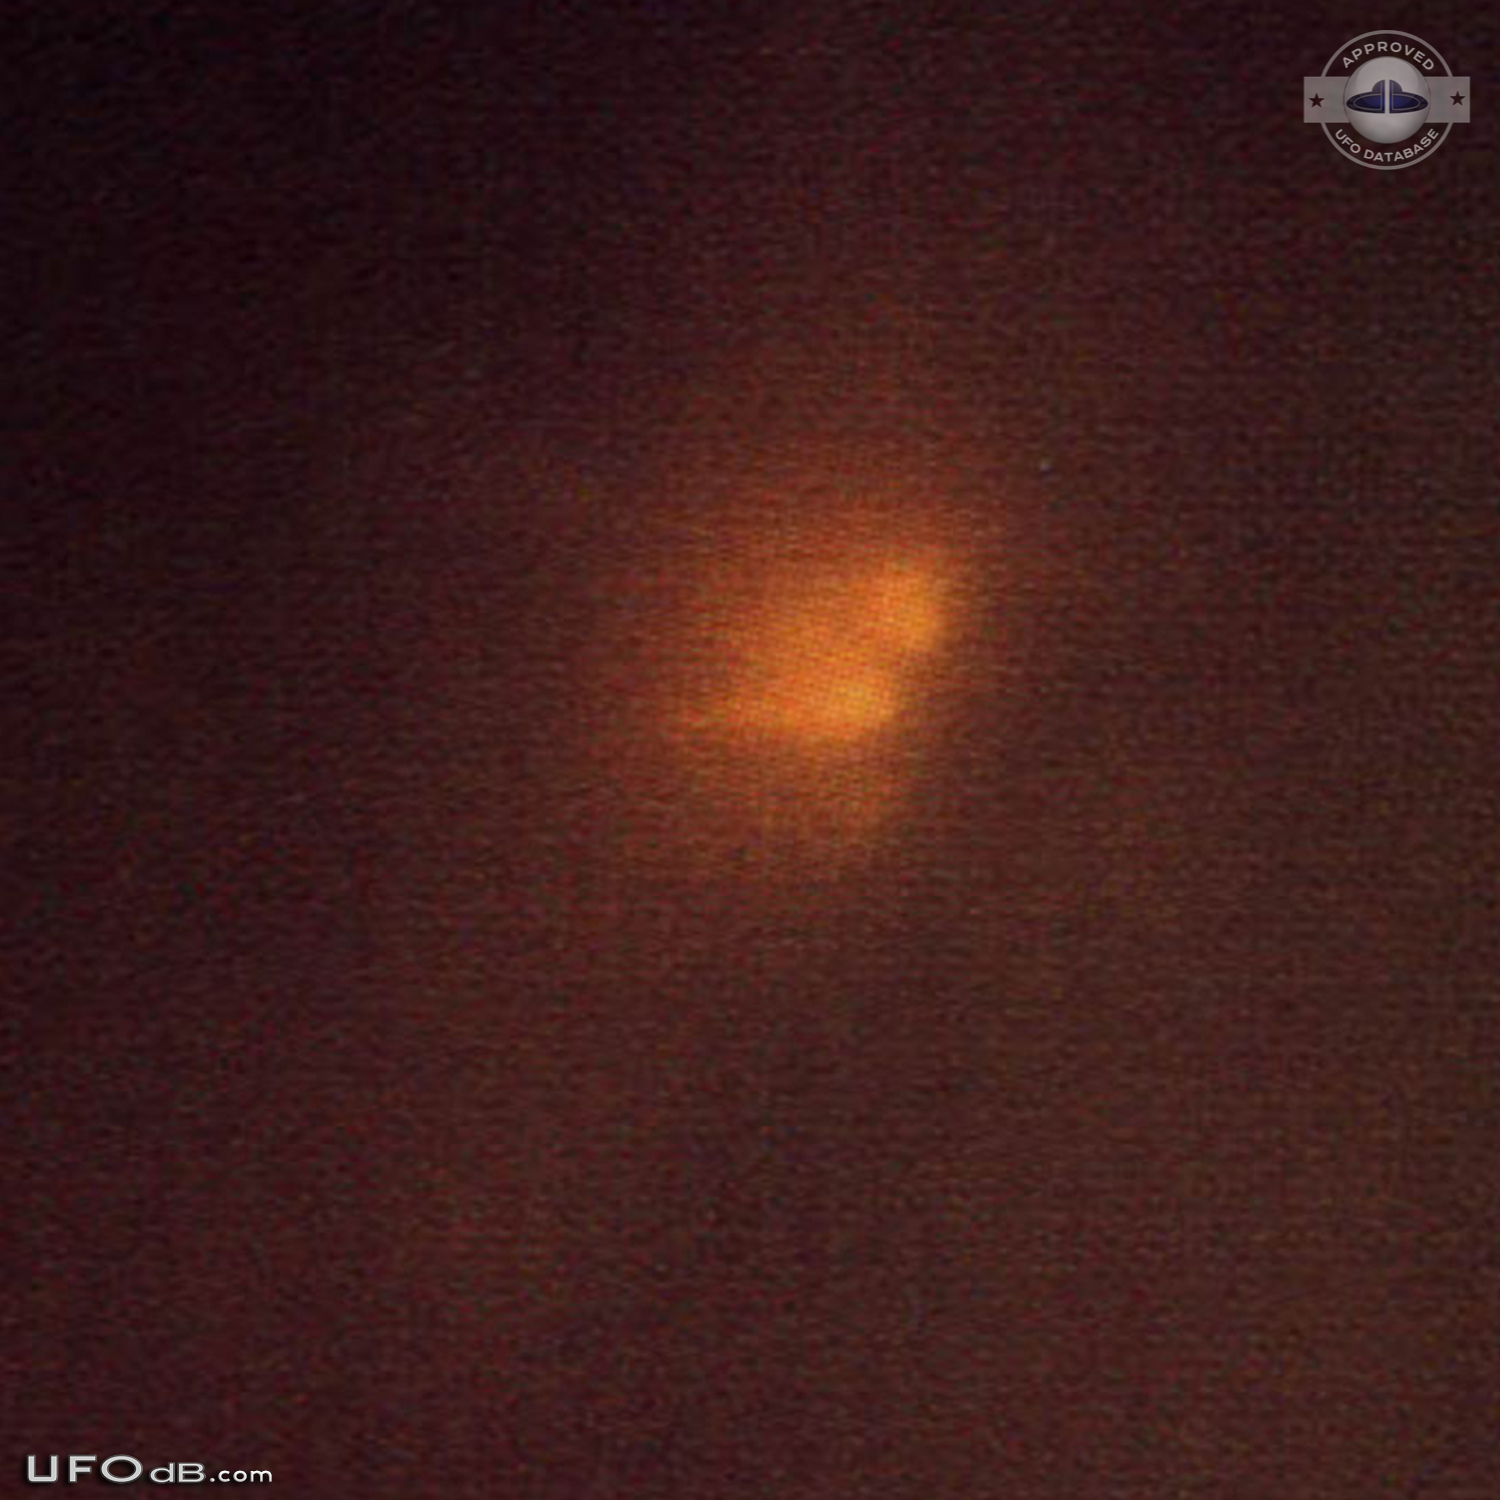 Famous Montreal Canada mass ufo sighting of November 7 1990 UFO Picture #546-2